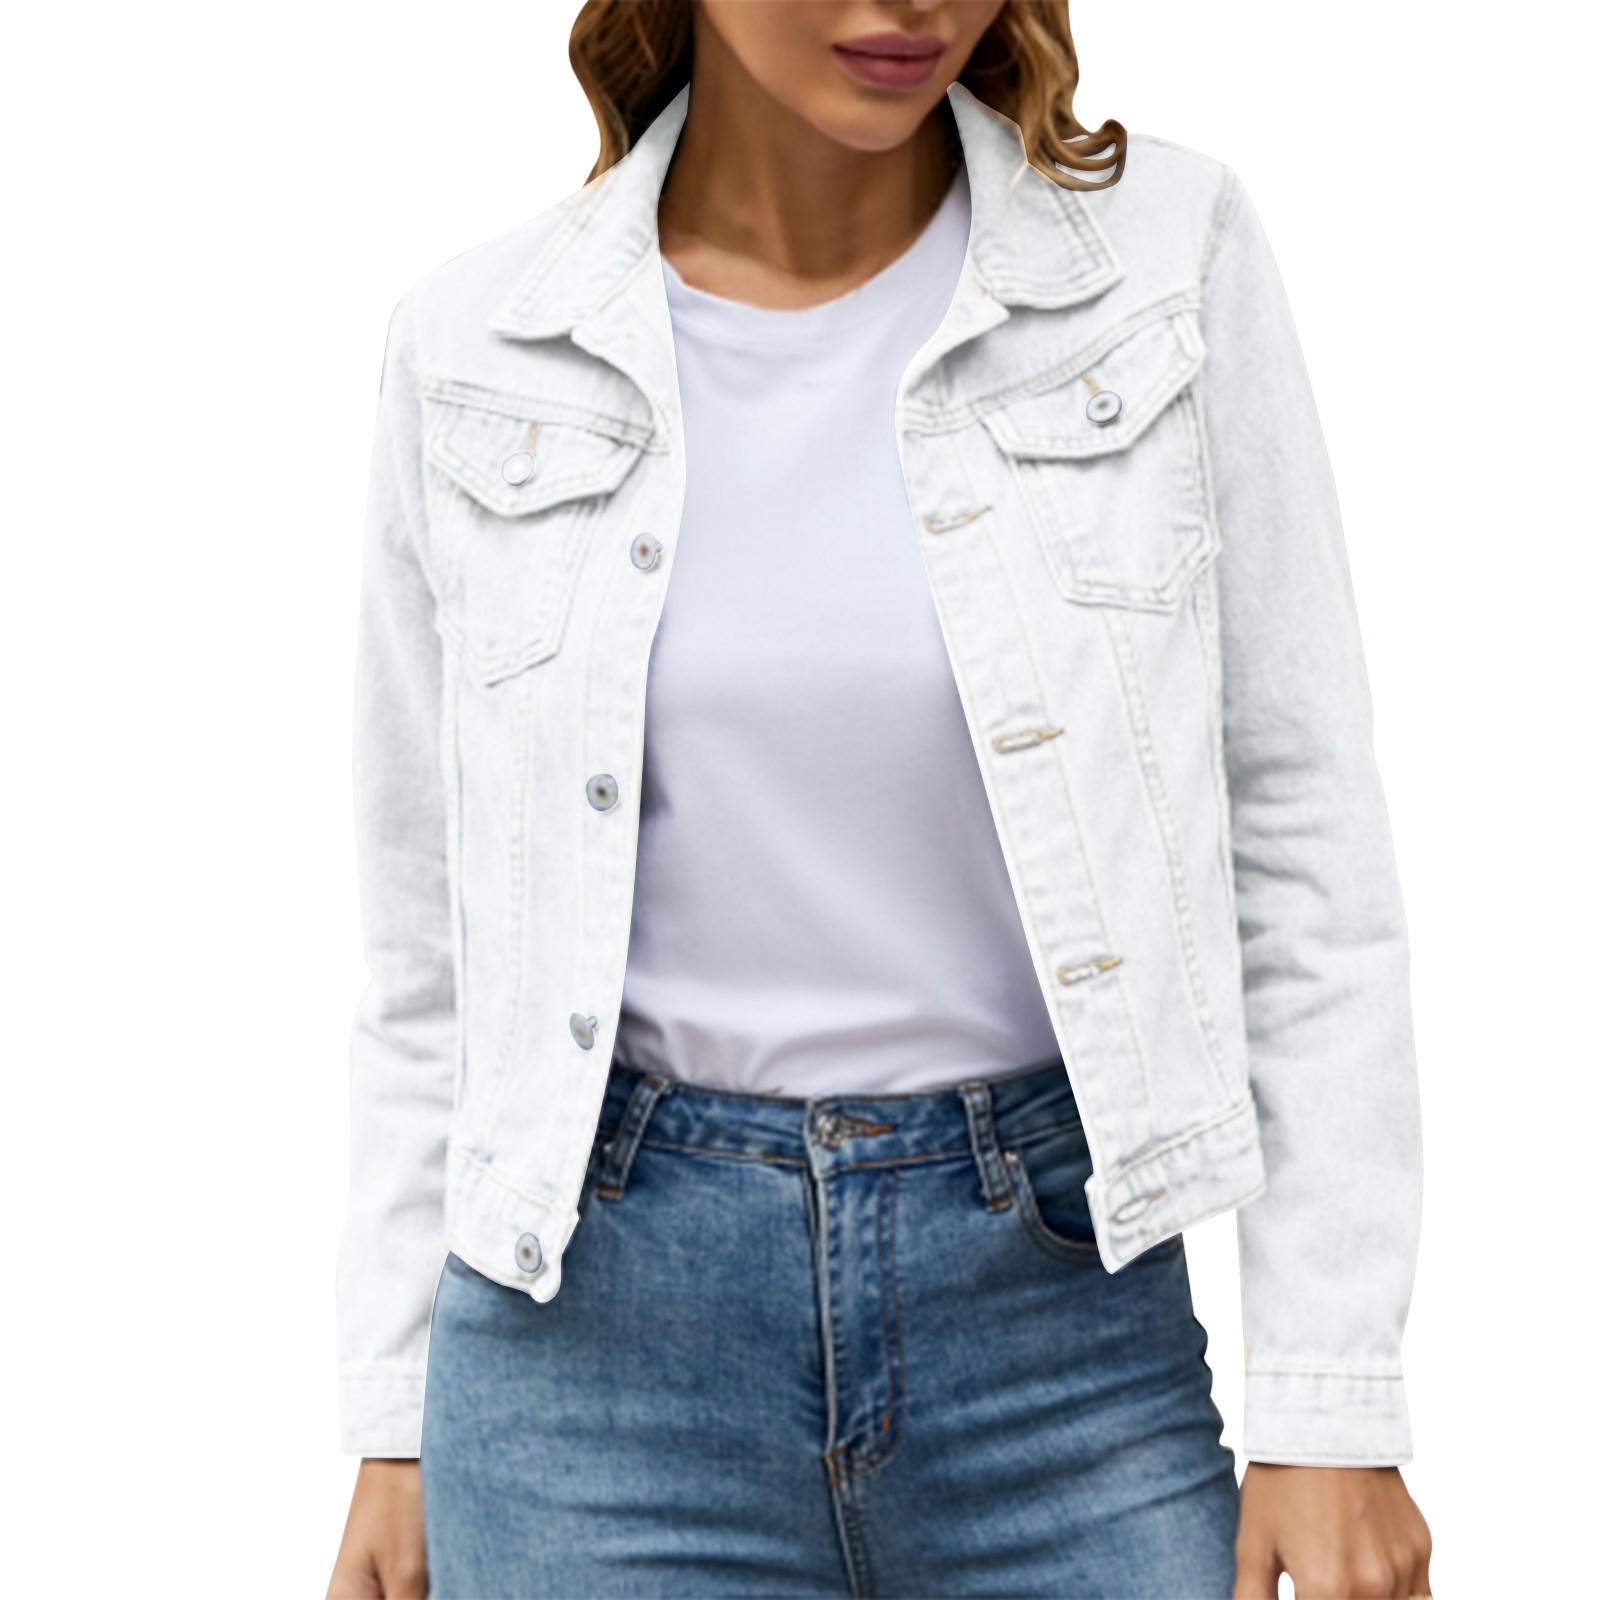 iOPQO womens sweaters Women's Basic Solid Color Button Down Denim Cotton Jacket With Pockets Denim Jacket Coat Women's Denim Jackets White S - image 3 of 8